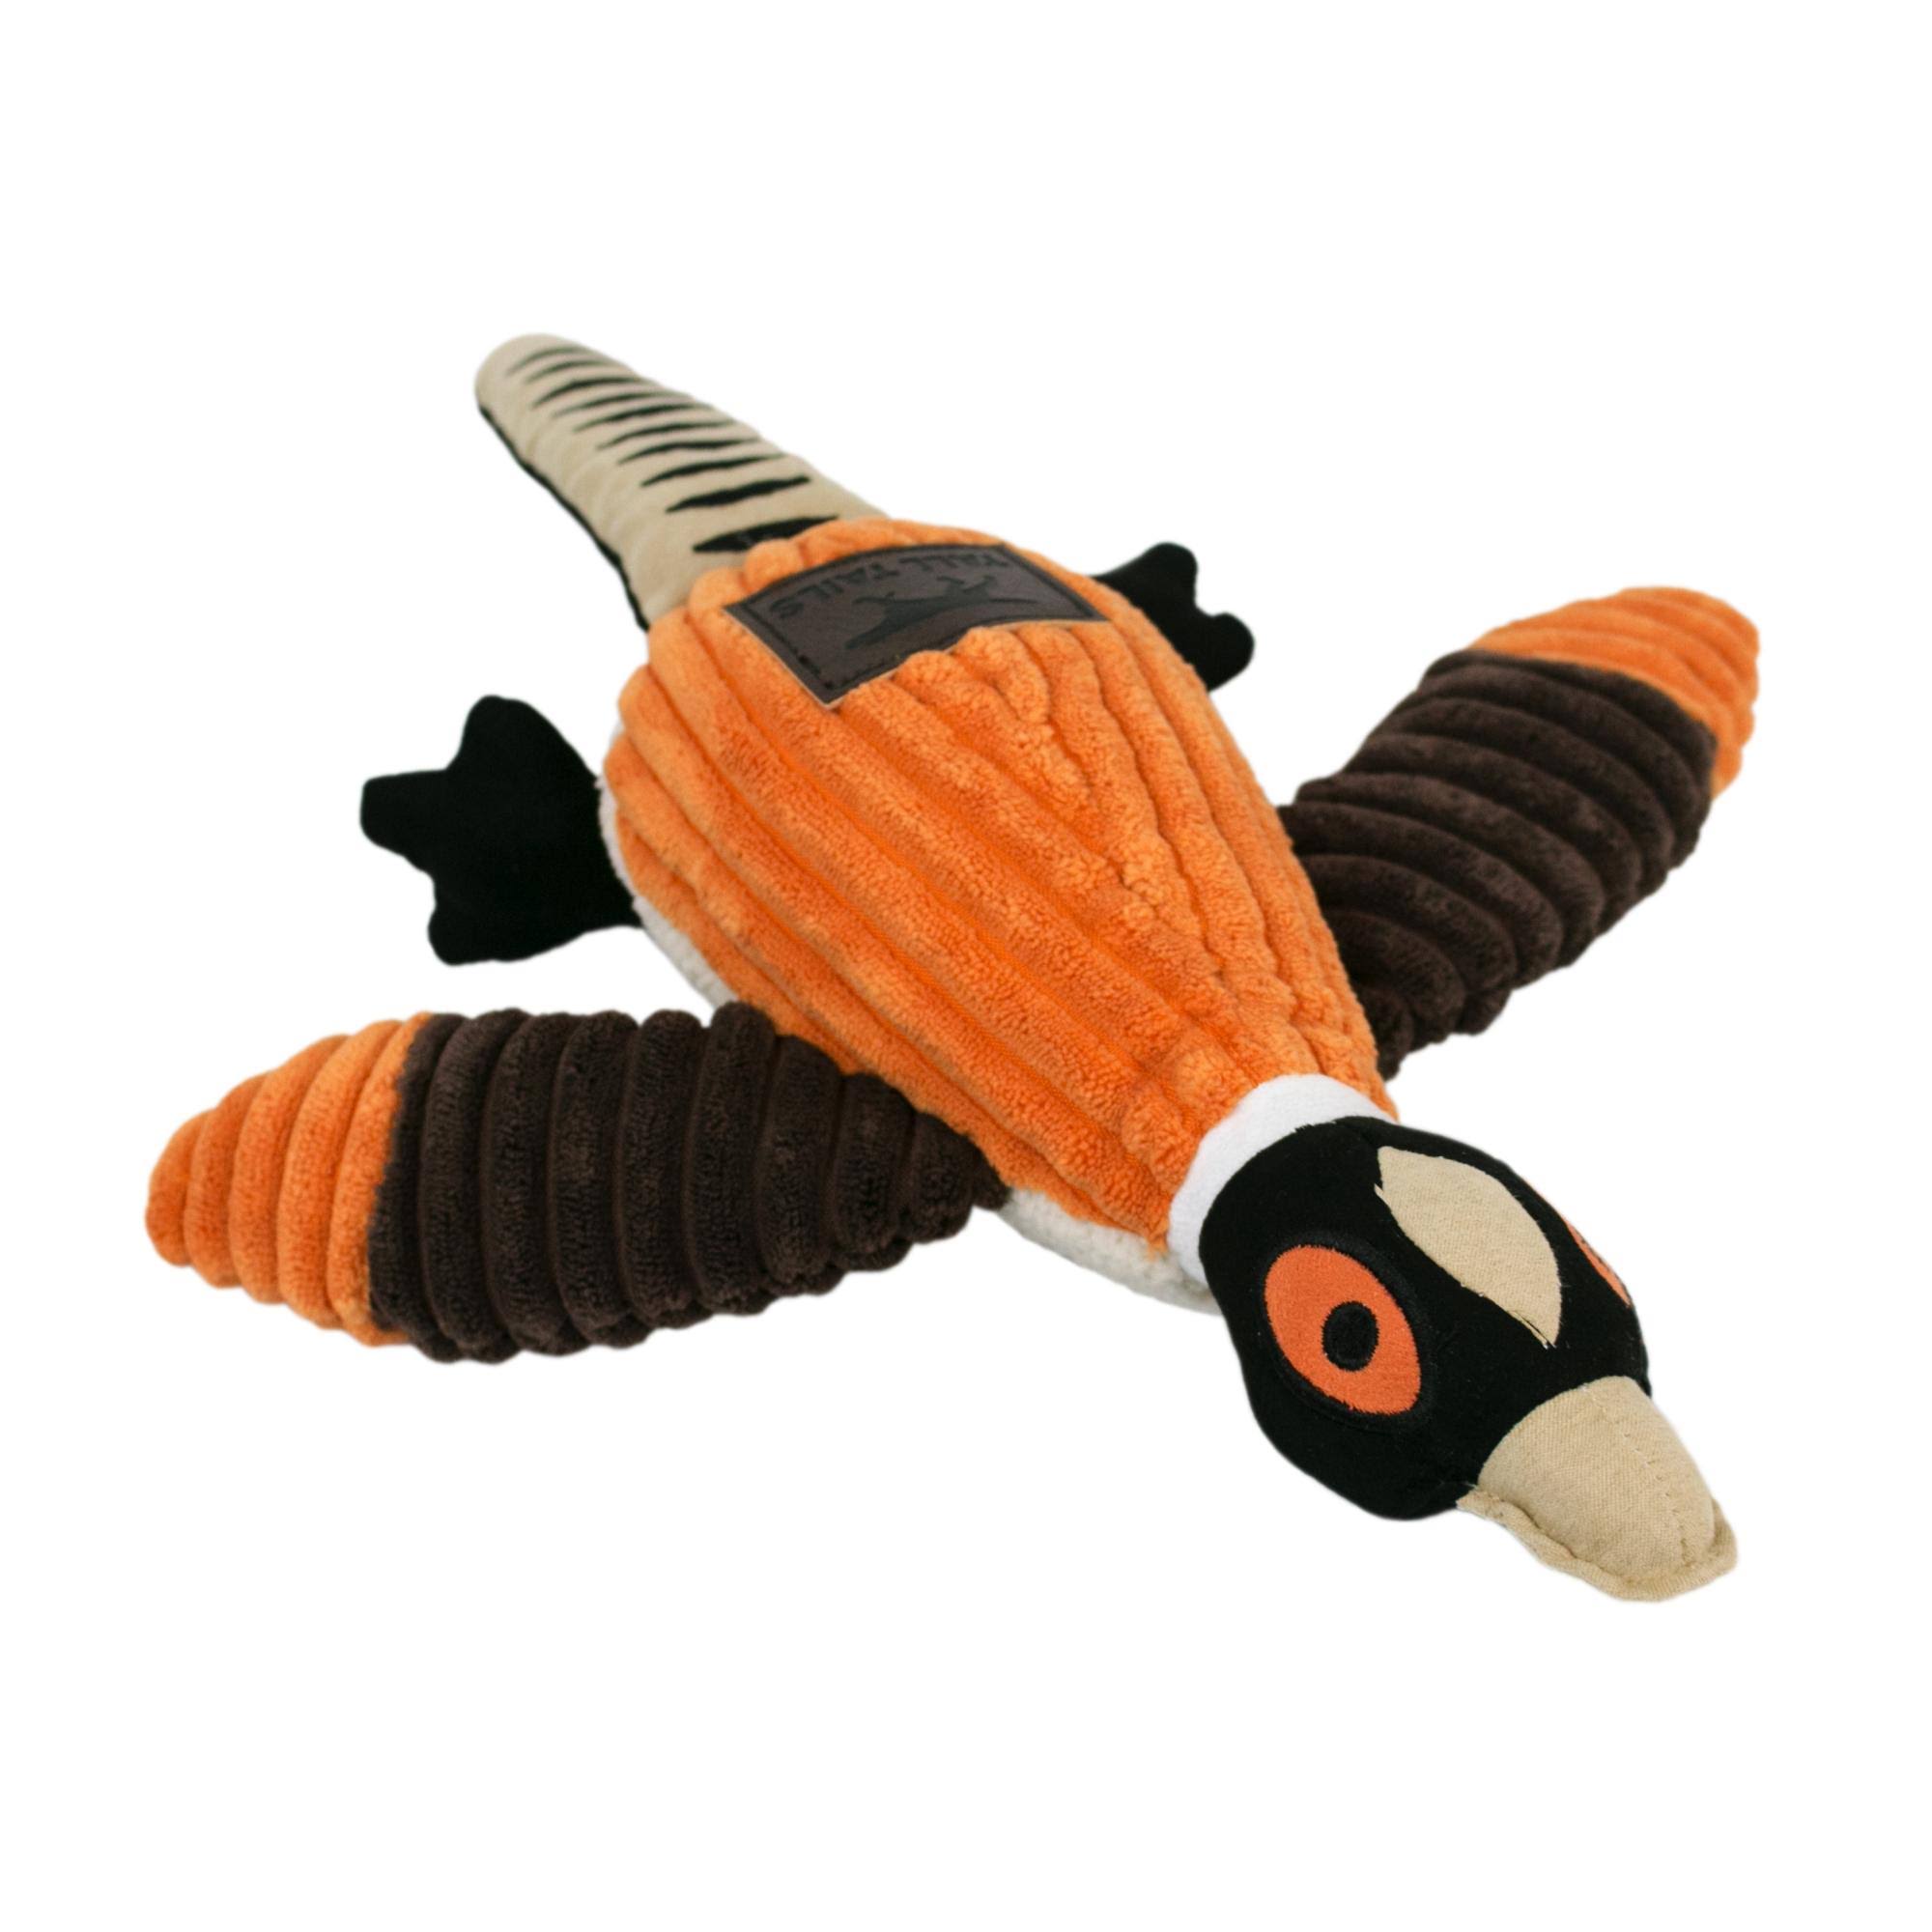 Tall Tails Plush Squeaker Pheasant 16" Dog Toy